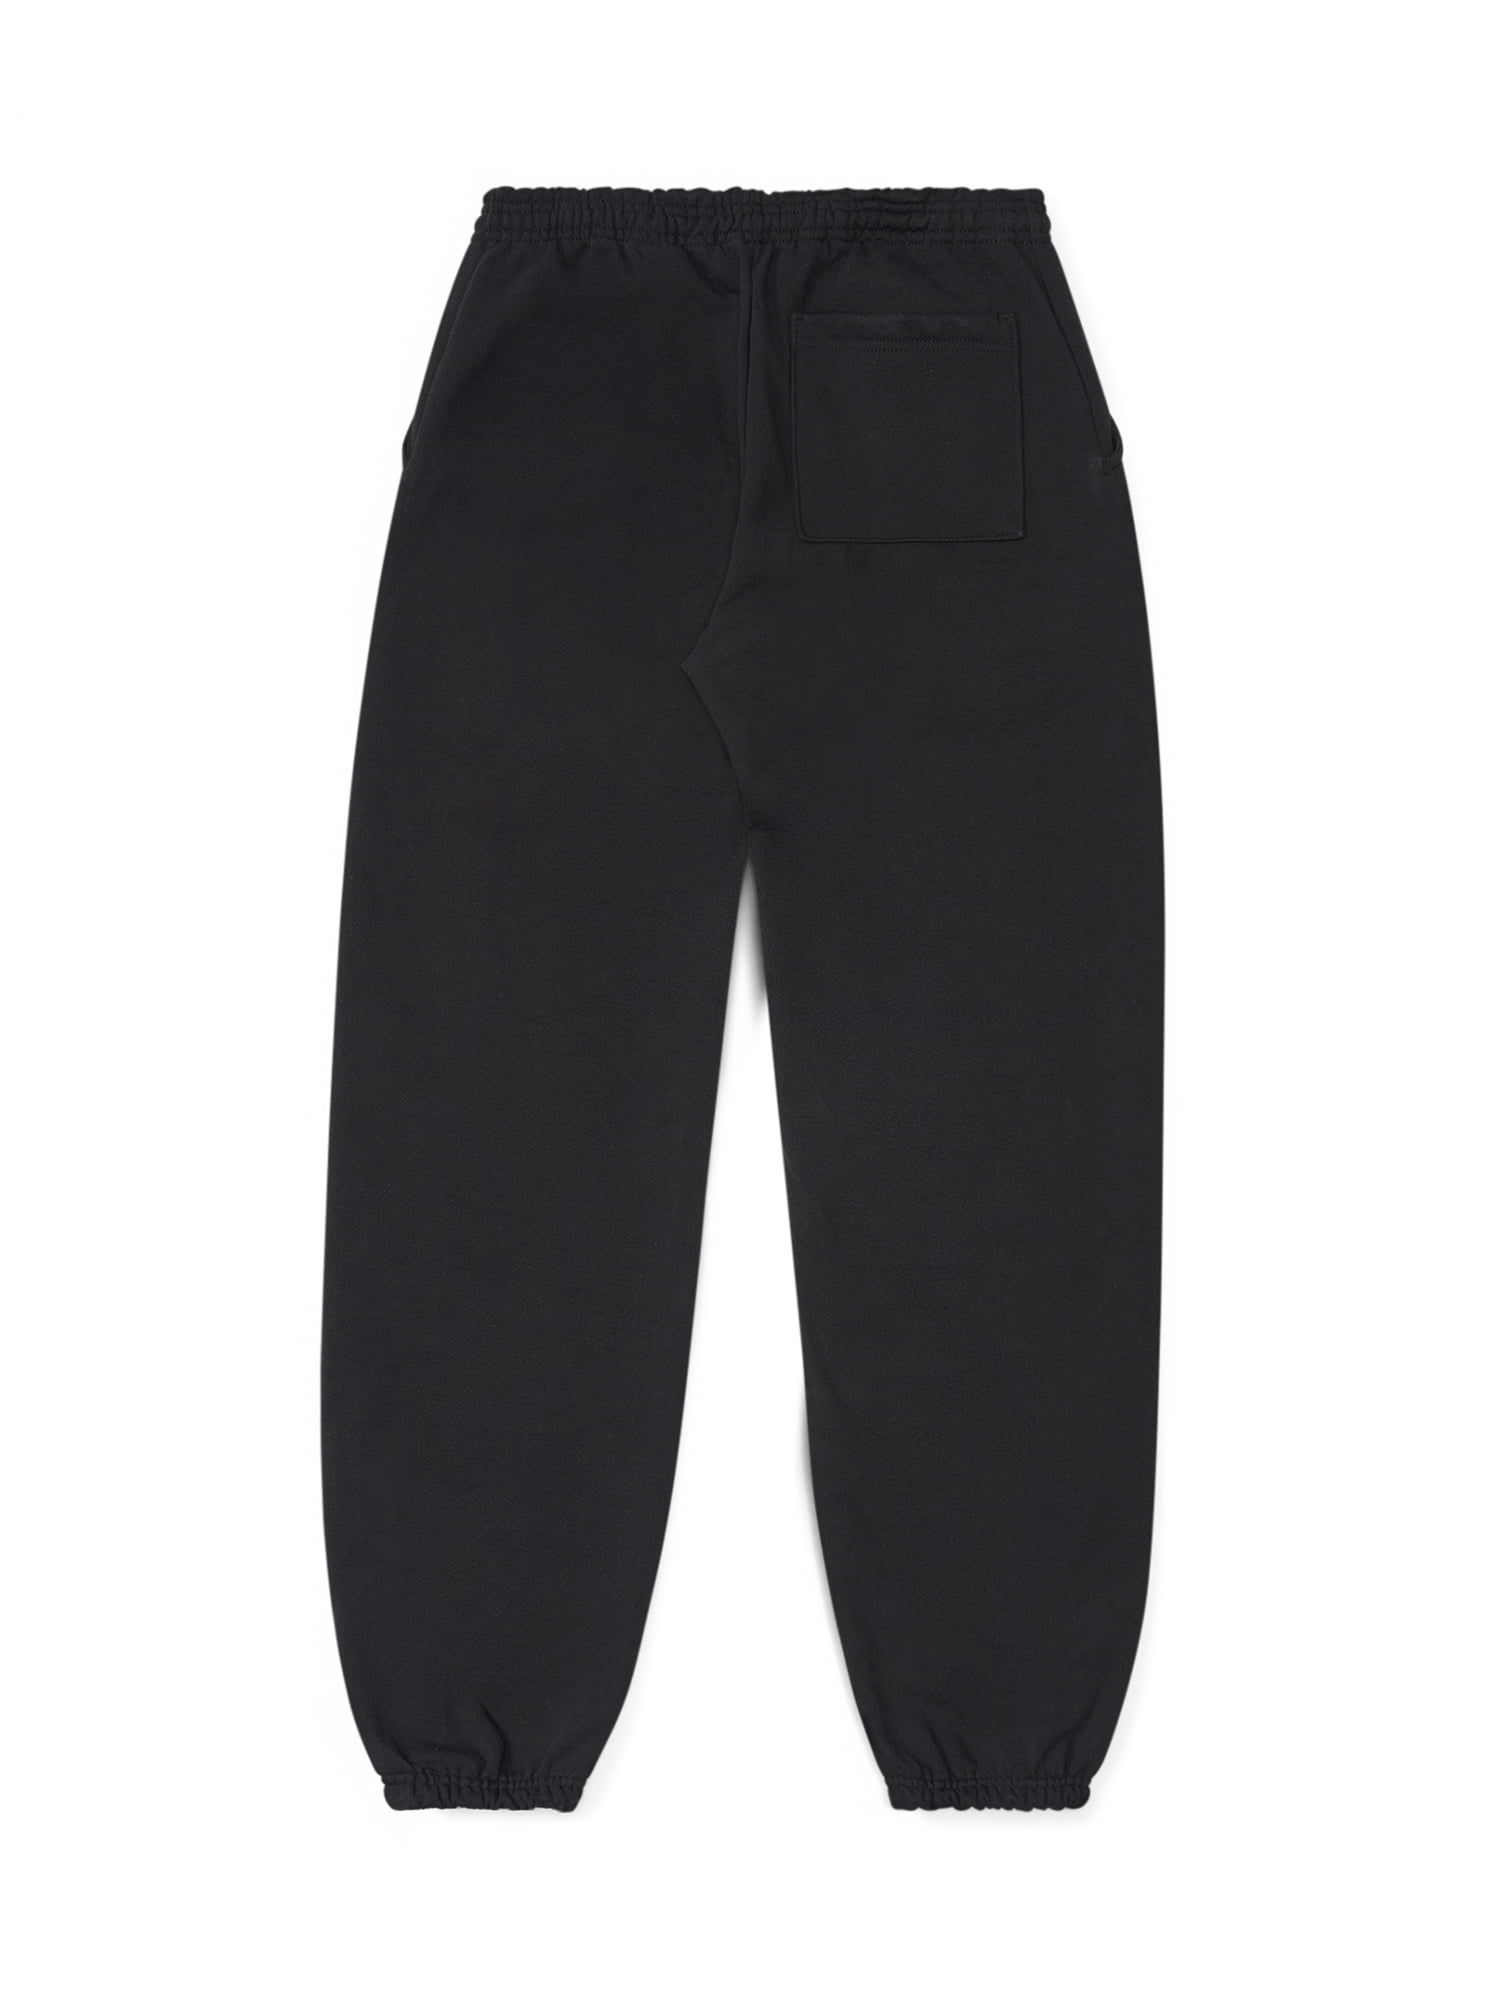 BLACK JOGGER | JOGGING PANTS FOR CHILDREN | COOL BOYS WEAR - Minis Only |  Kids clothing and Baby clothing